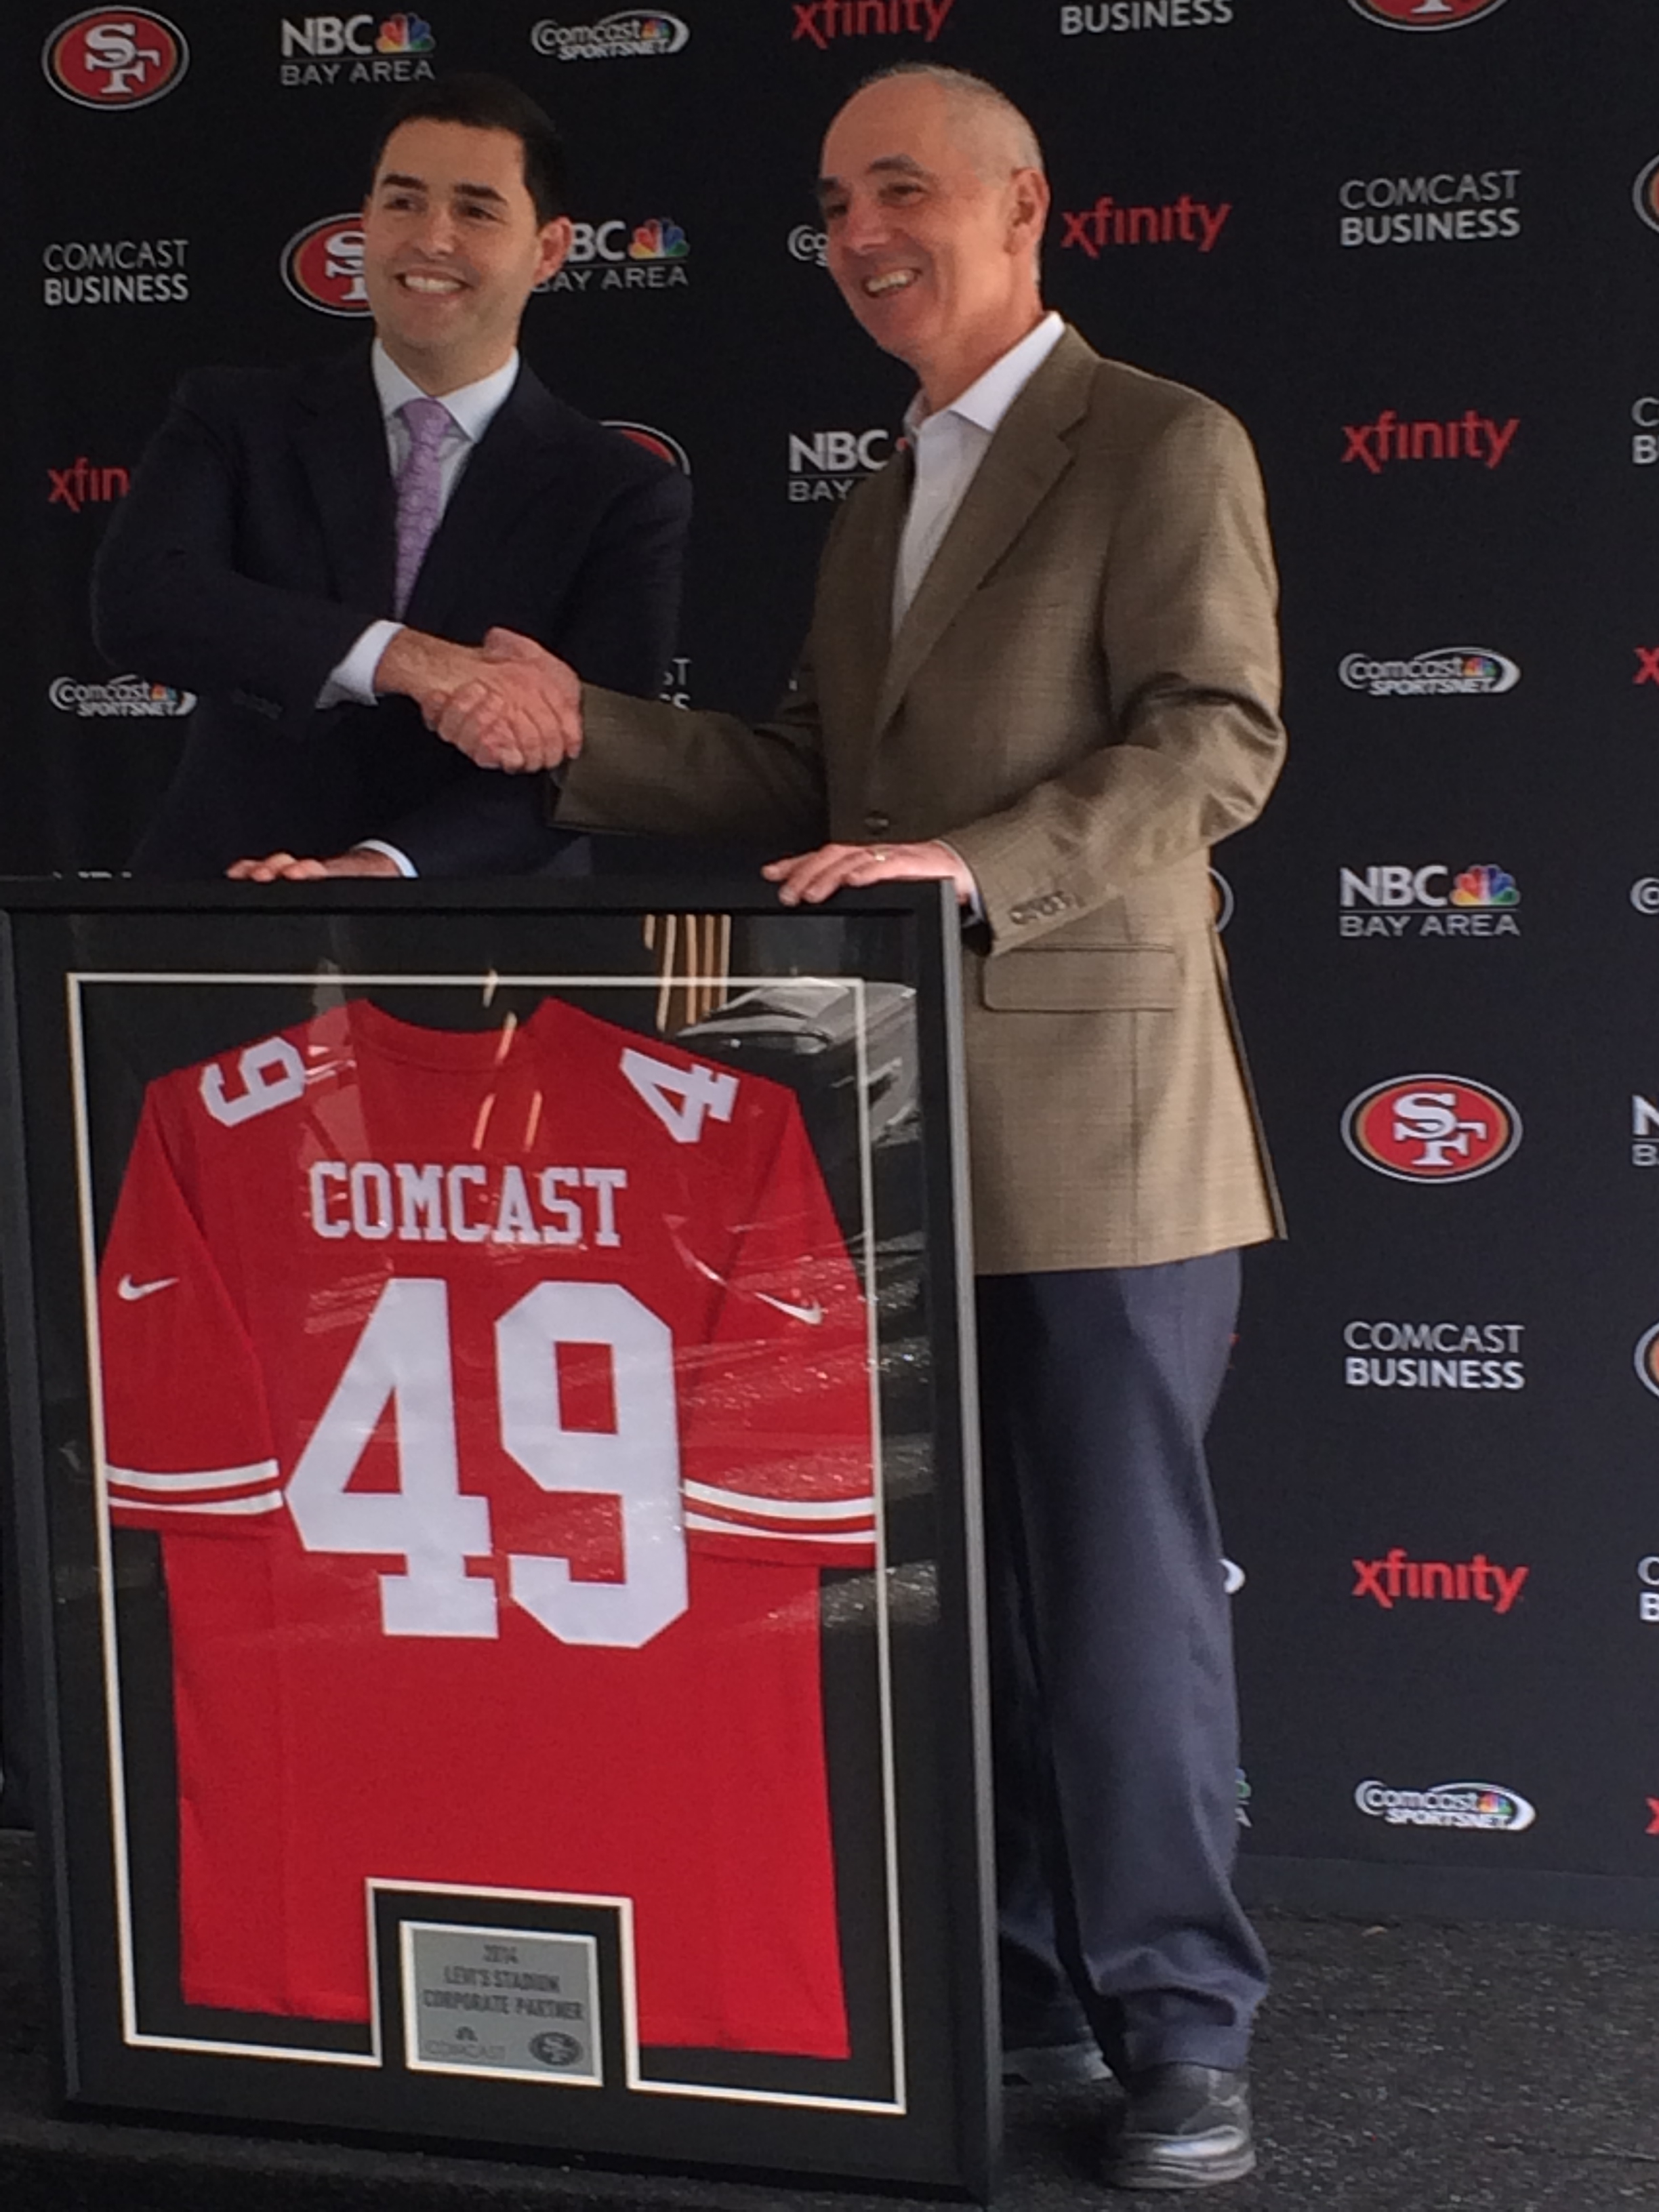 Comcast, NBCUniversal, 49ers Announce 10-Year Partnership - NBC Bay Area2448 x 3264